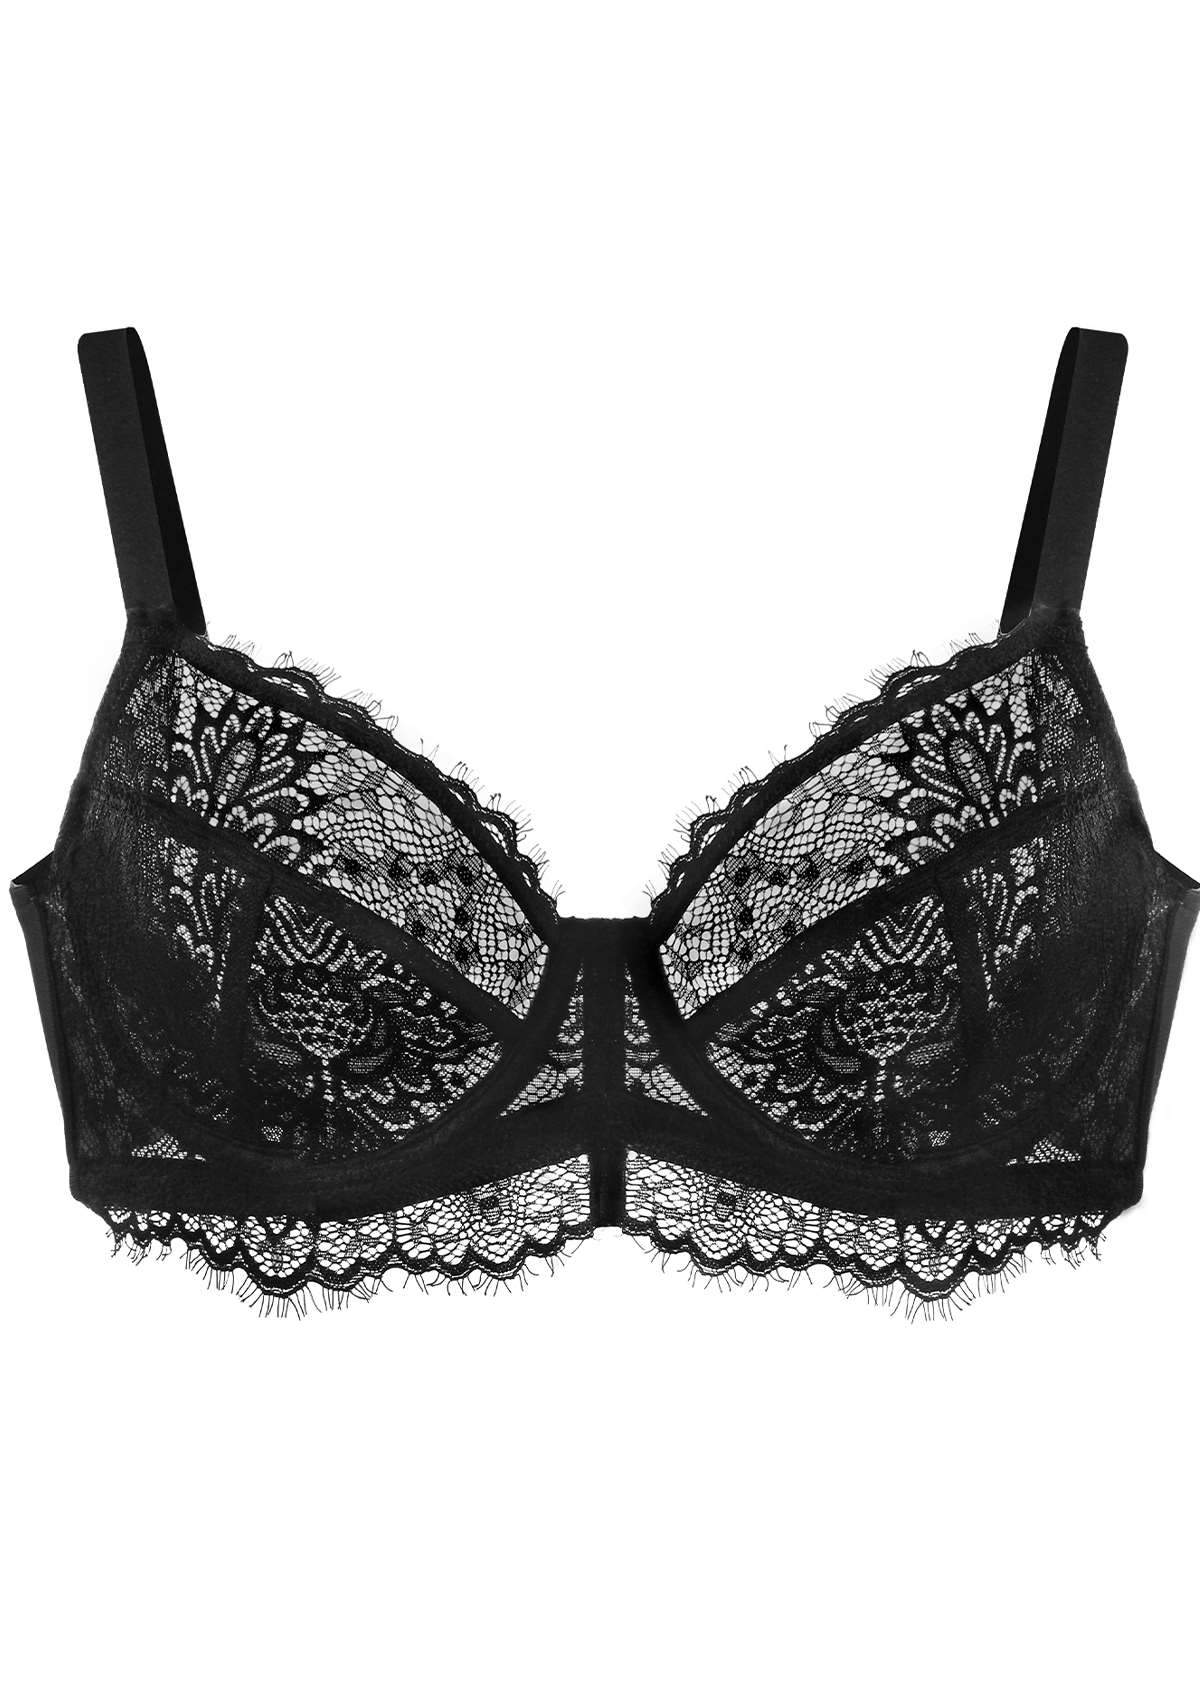 HSIA Sunflower Matching Bra And Underwear: Back And Side Smoothing Bra - Black / 38 / G